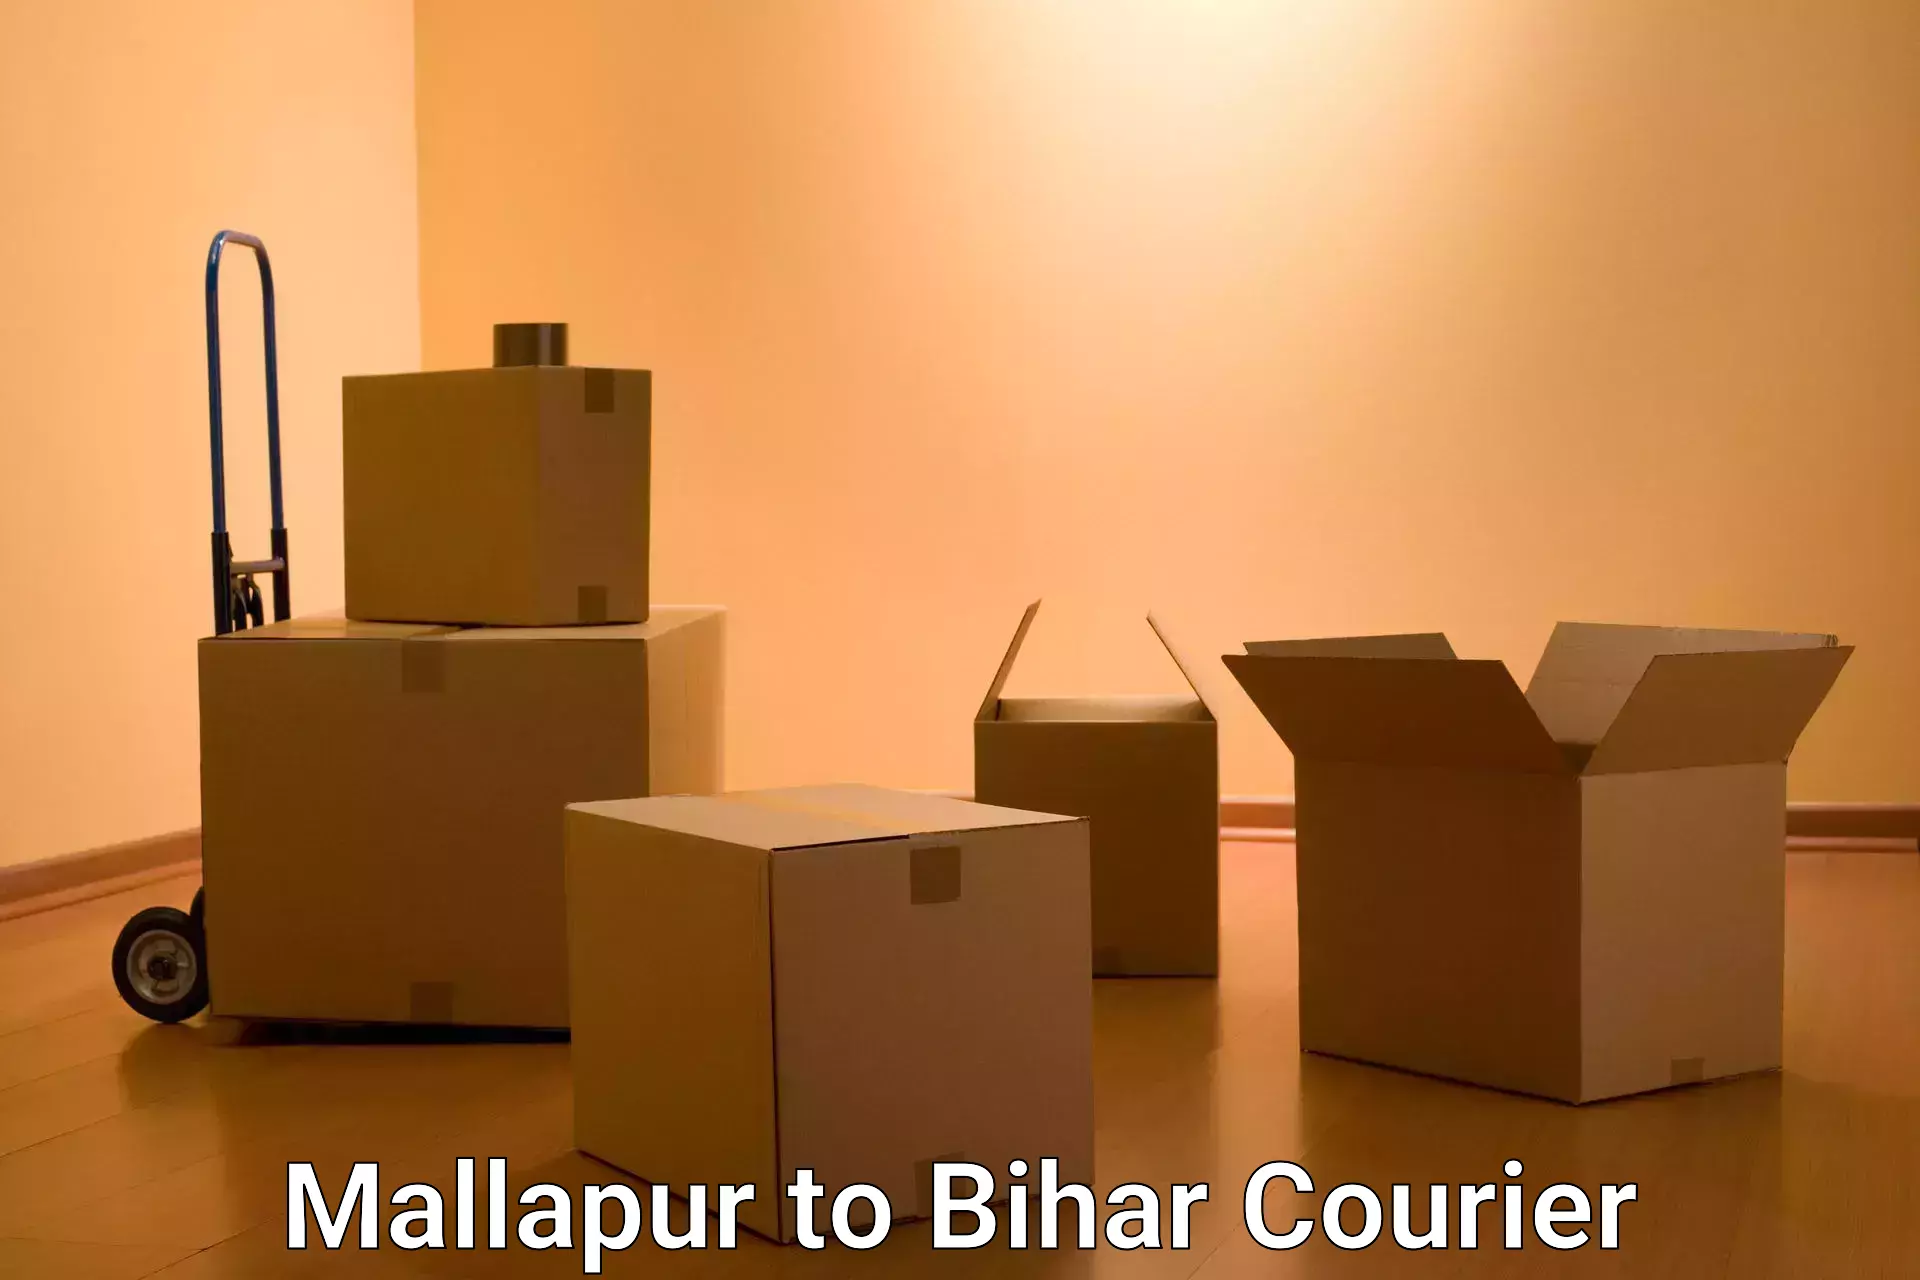 Air courier services in Mallapur to Dhaka